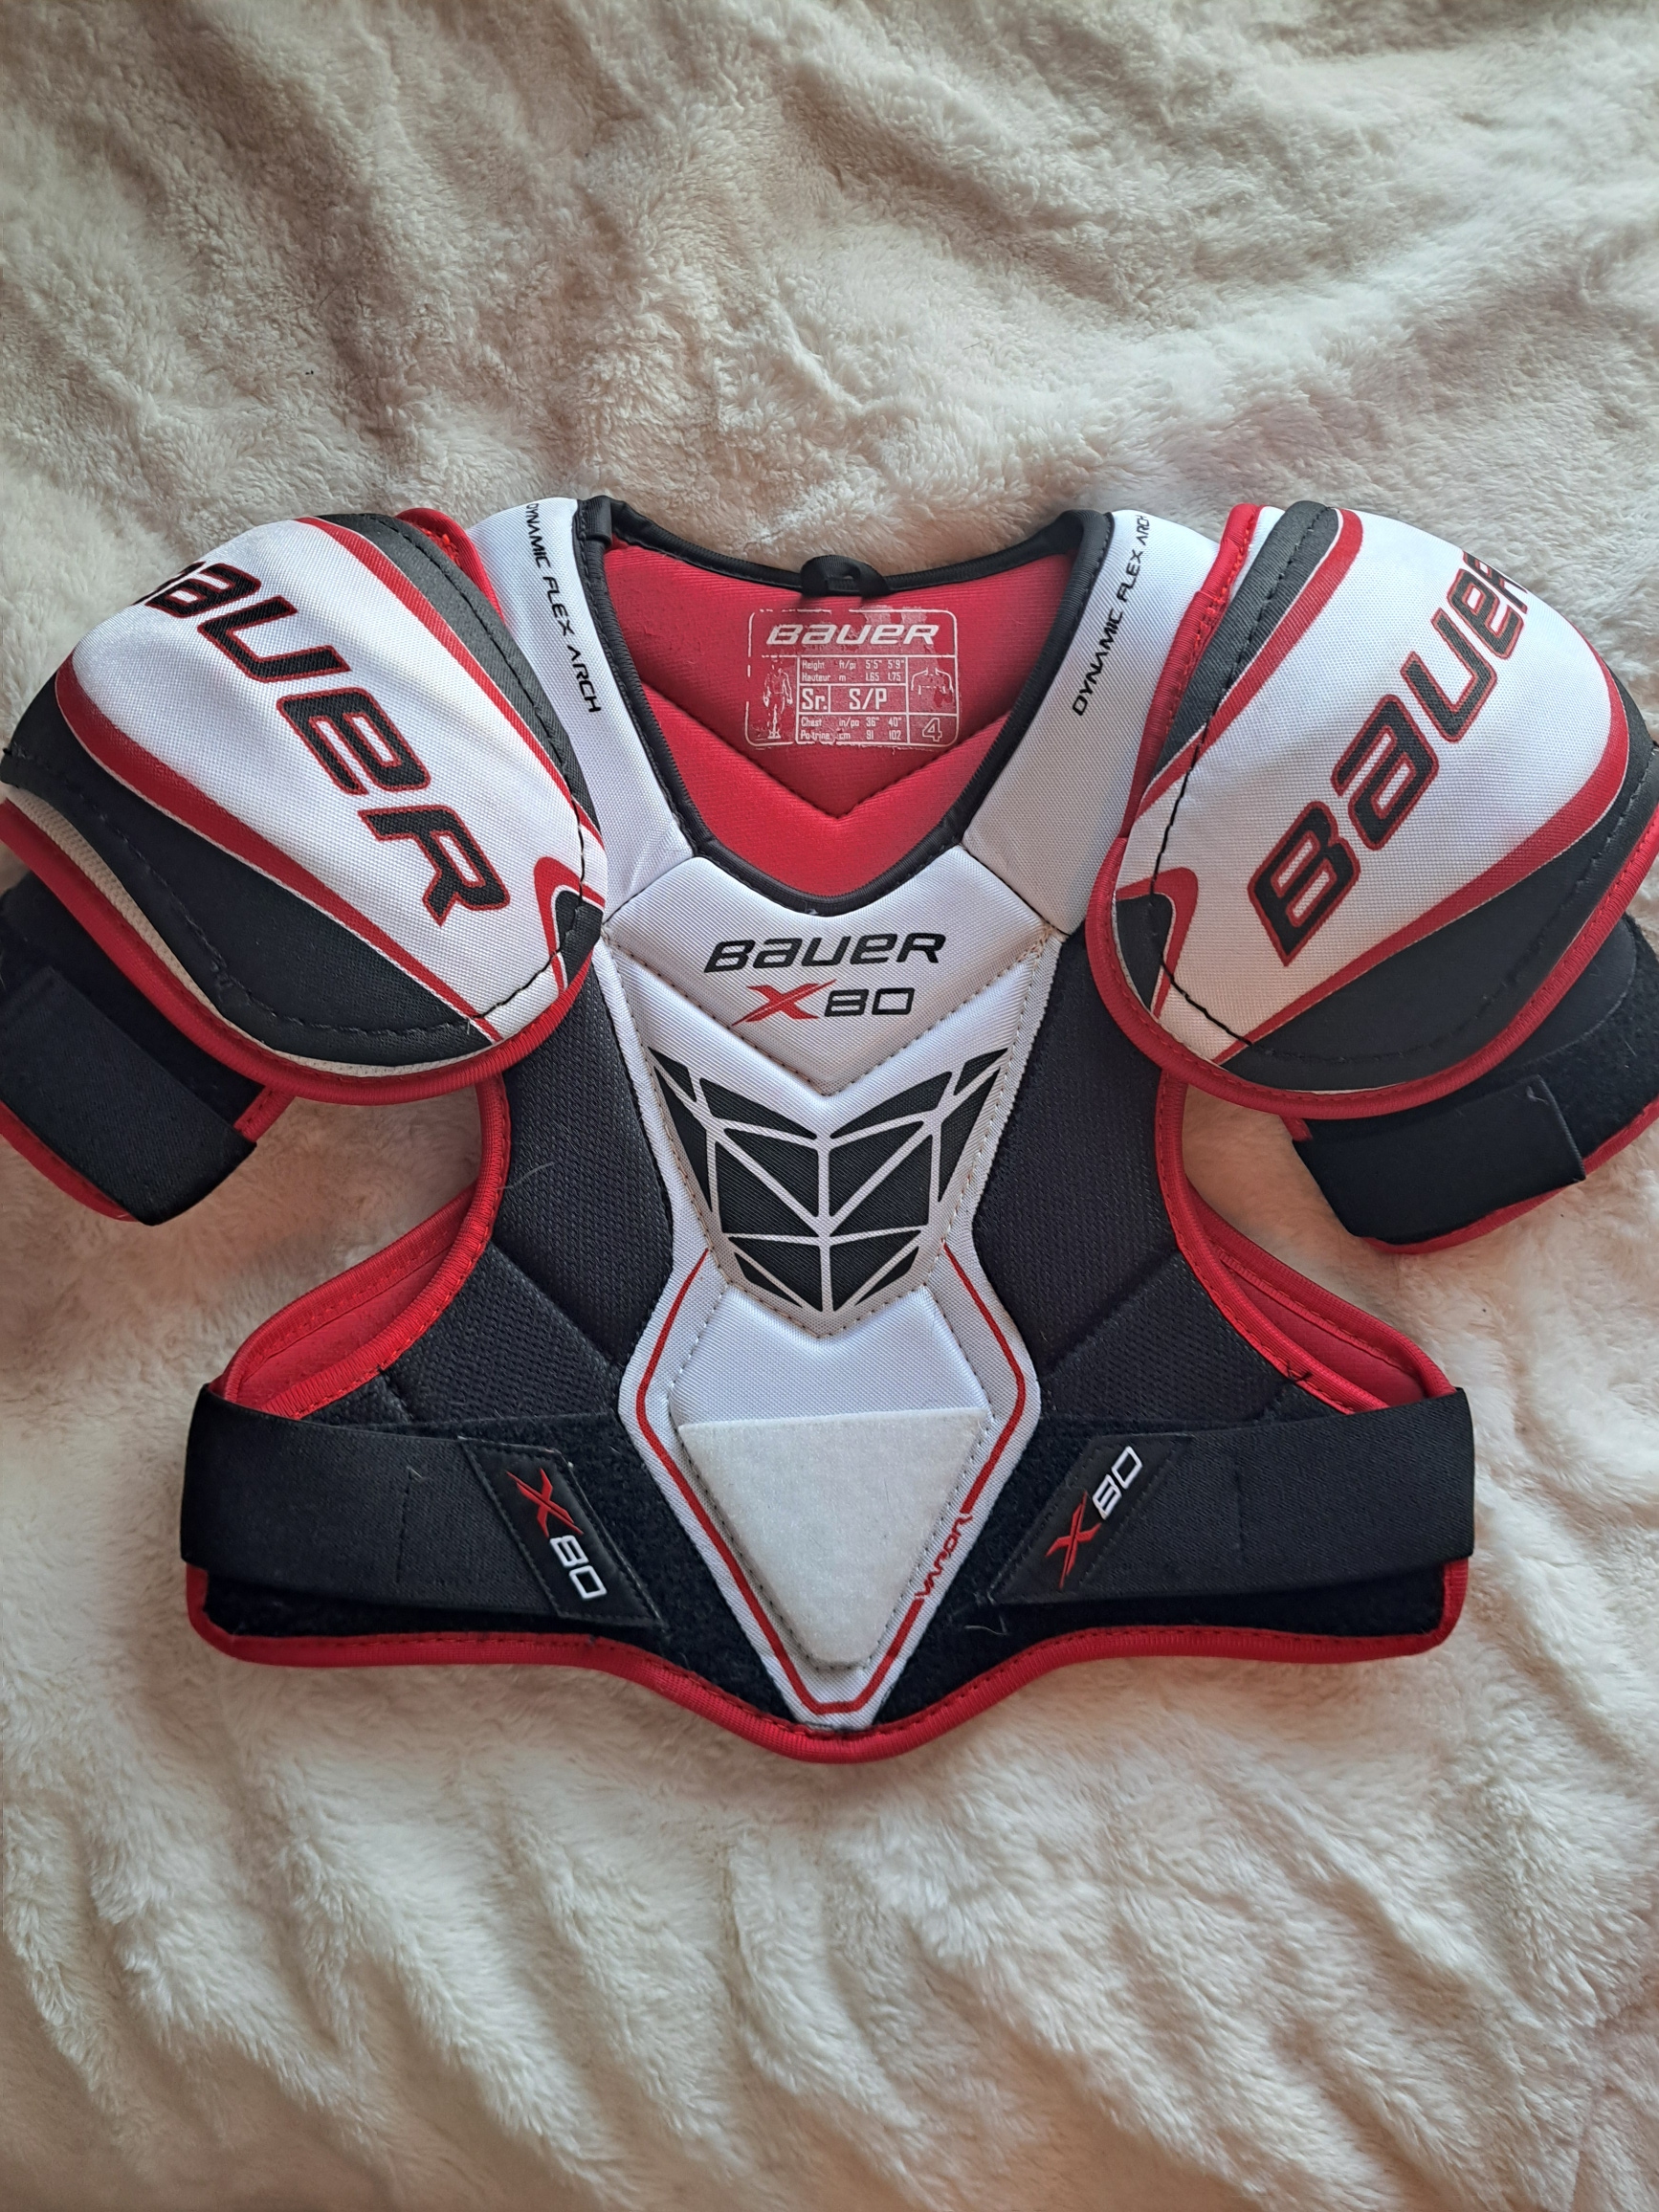 Senior Used Small Bauer bauer x Shoulder Pads